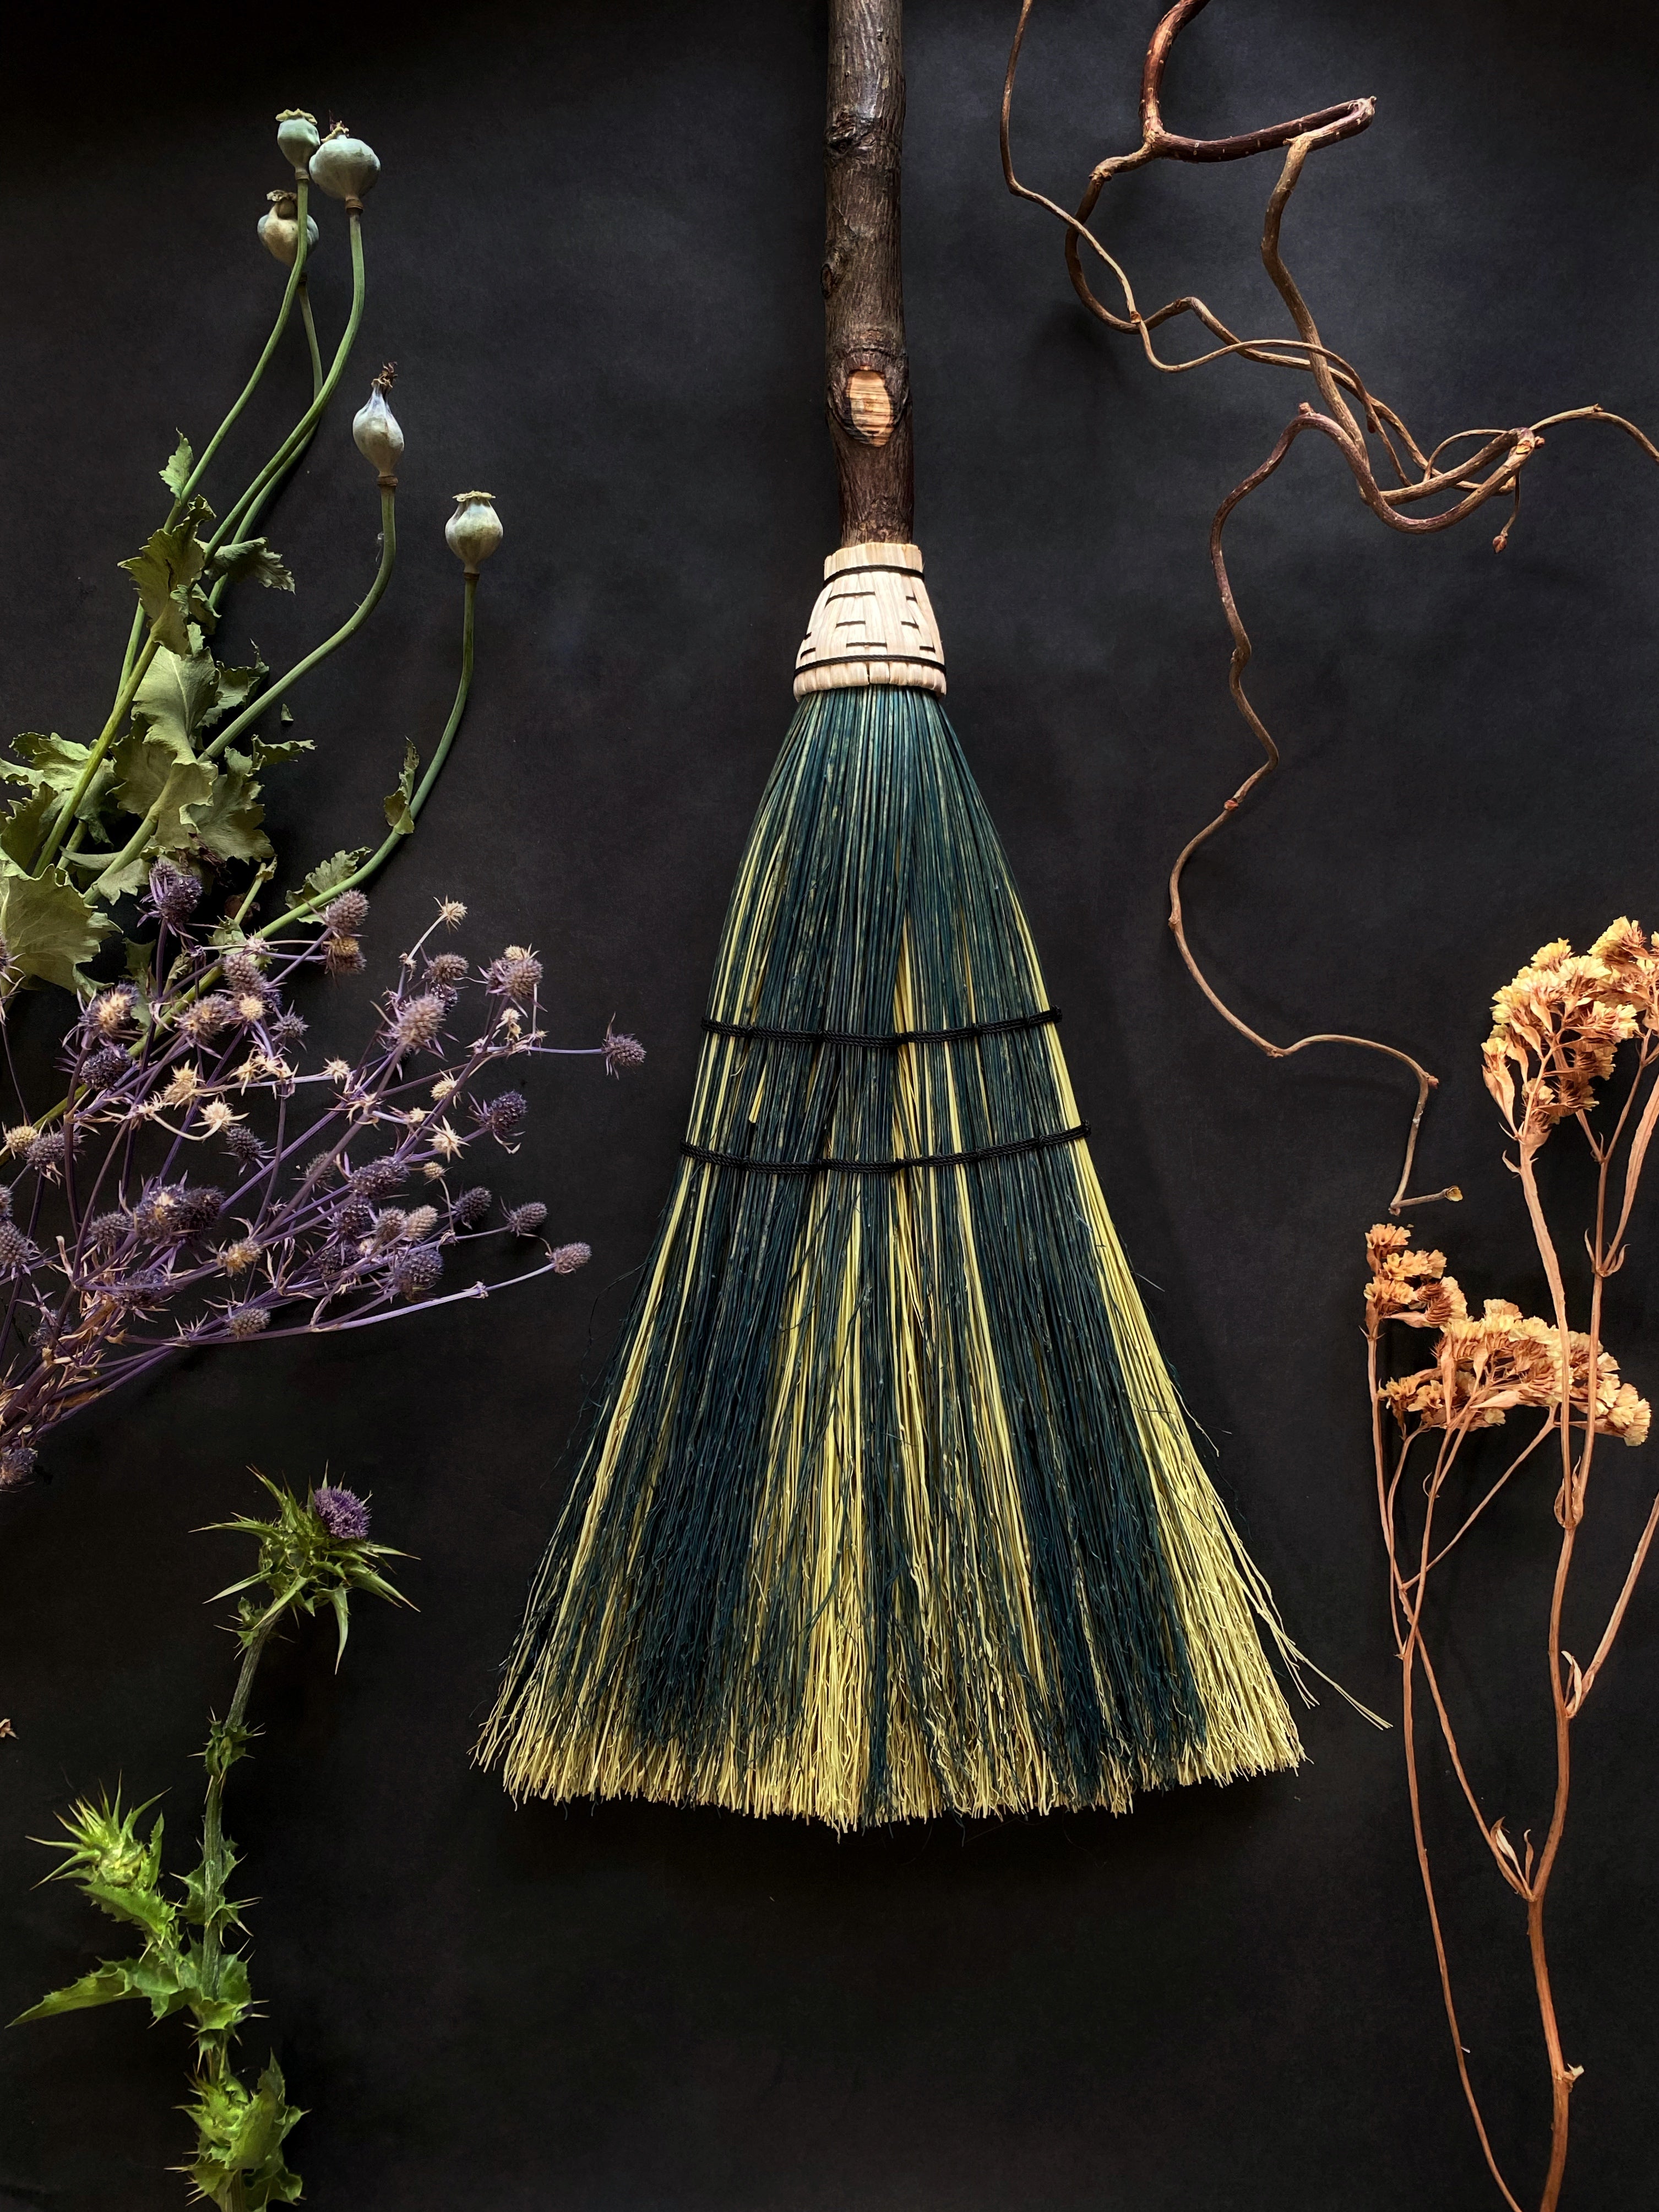 "Big Boss Witch" w/ Plaited Top, Sweeper Brooms - Kitchen Broom